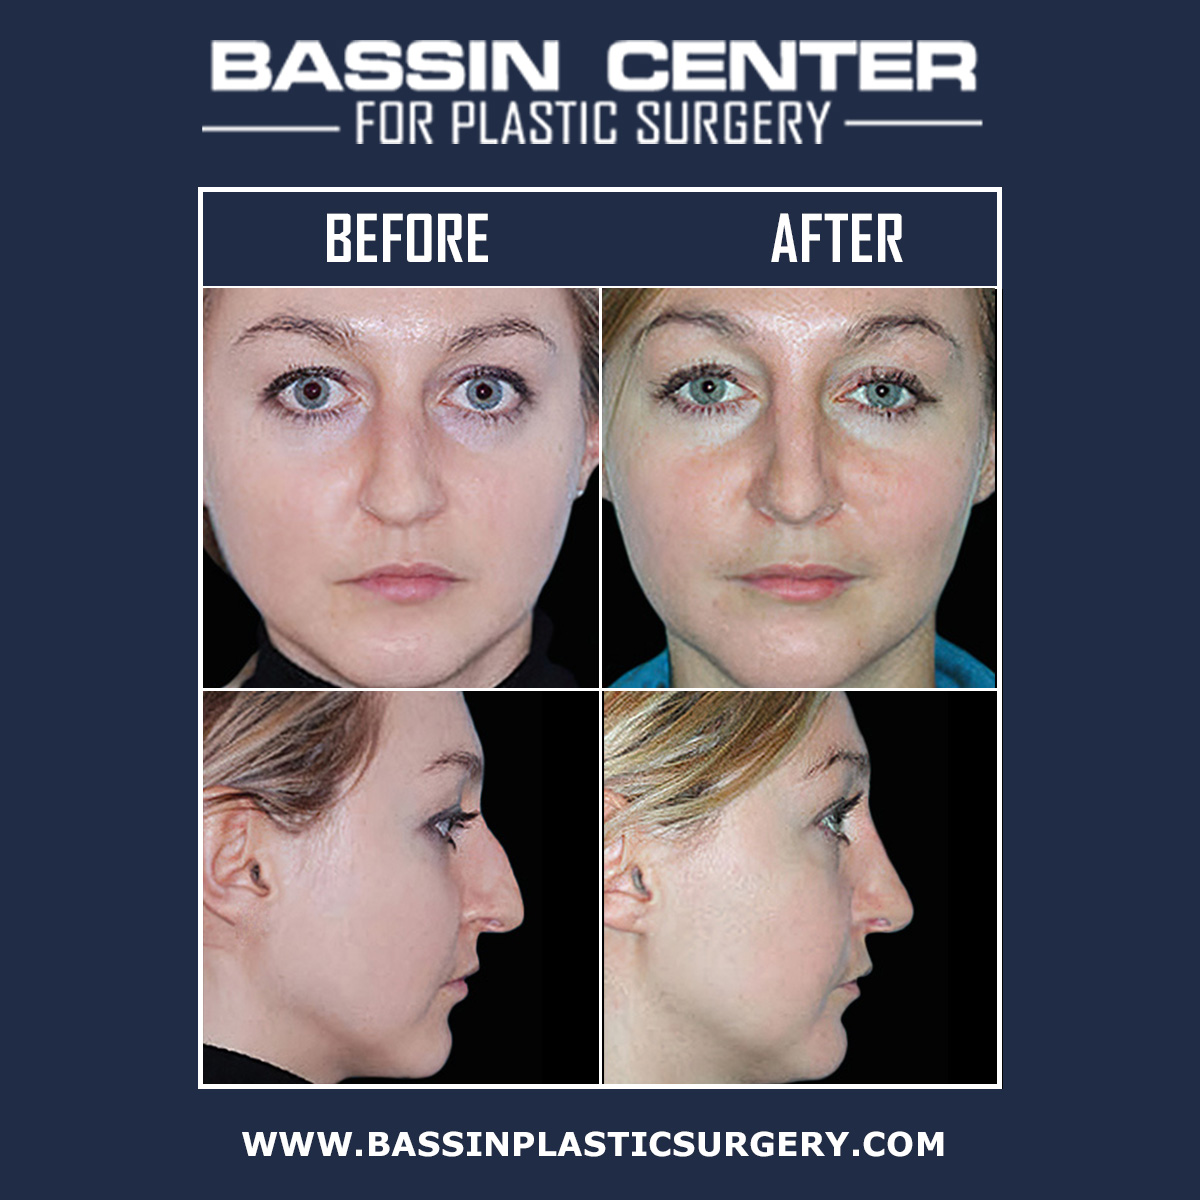 The Bassin Center For Plastic Surgery in Tampa offers rhinoplasty surgery for patients seeking to change the size or shape of their nose, balance the facial profile, or improve breathing problems. Achieve natural-looking results with nose surgery in Tampa.